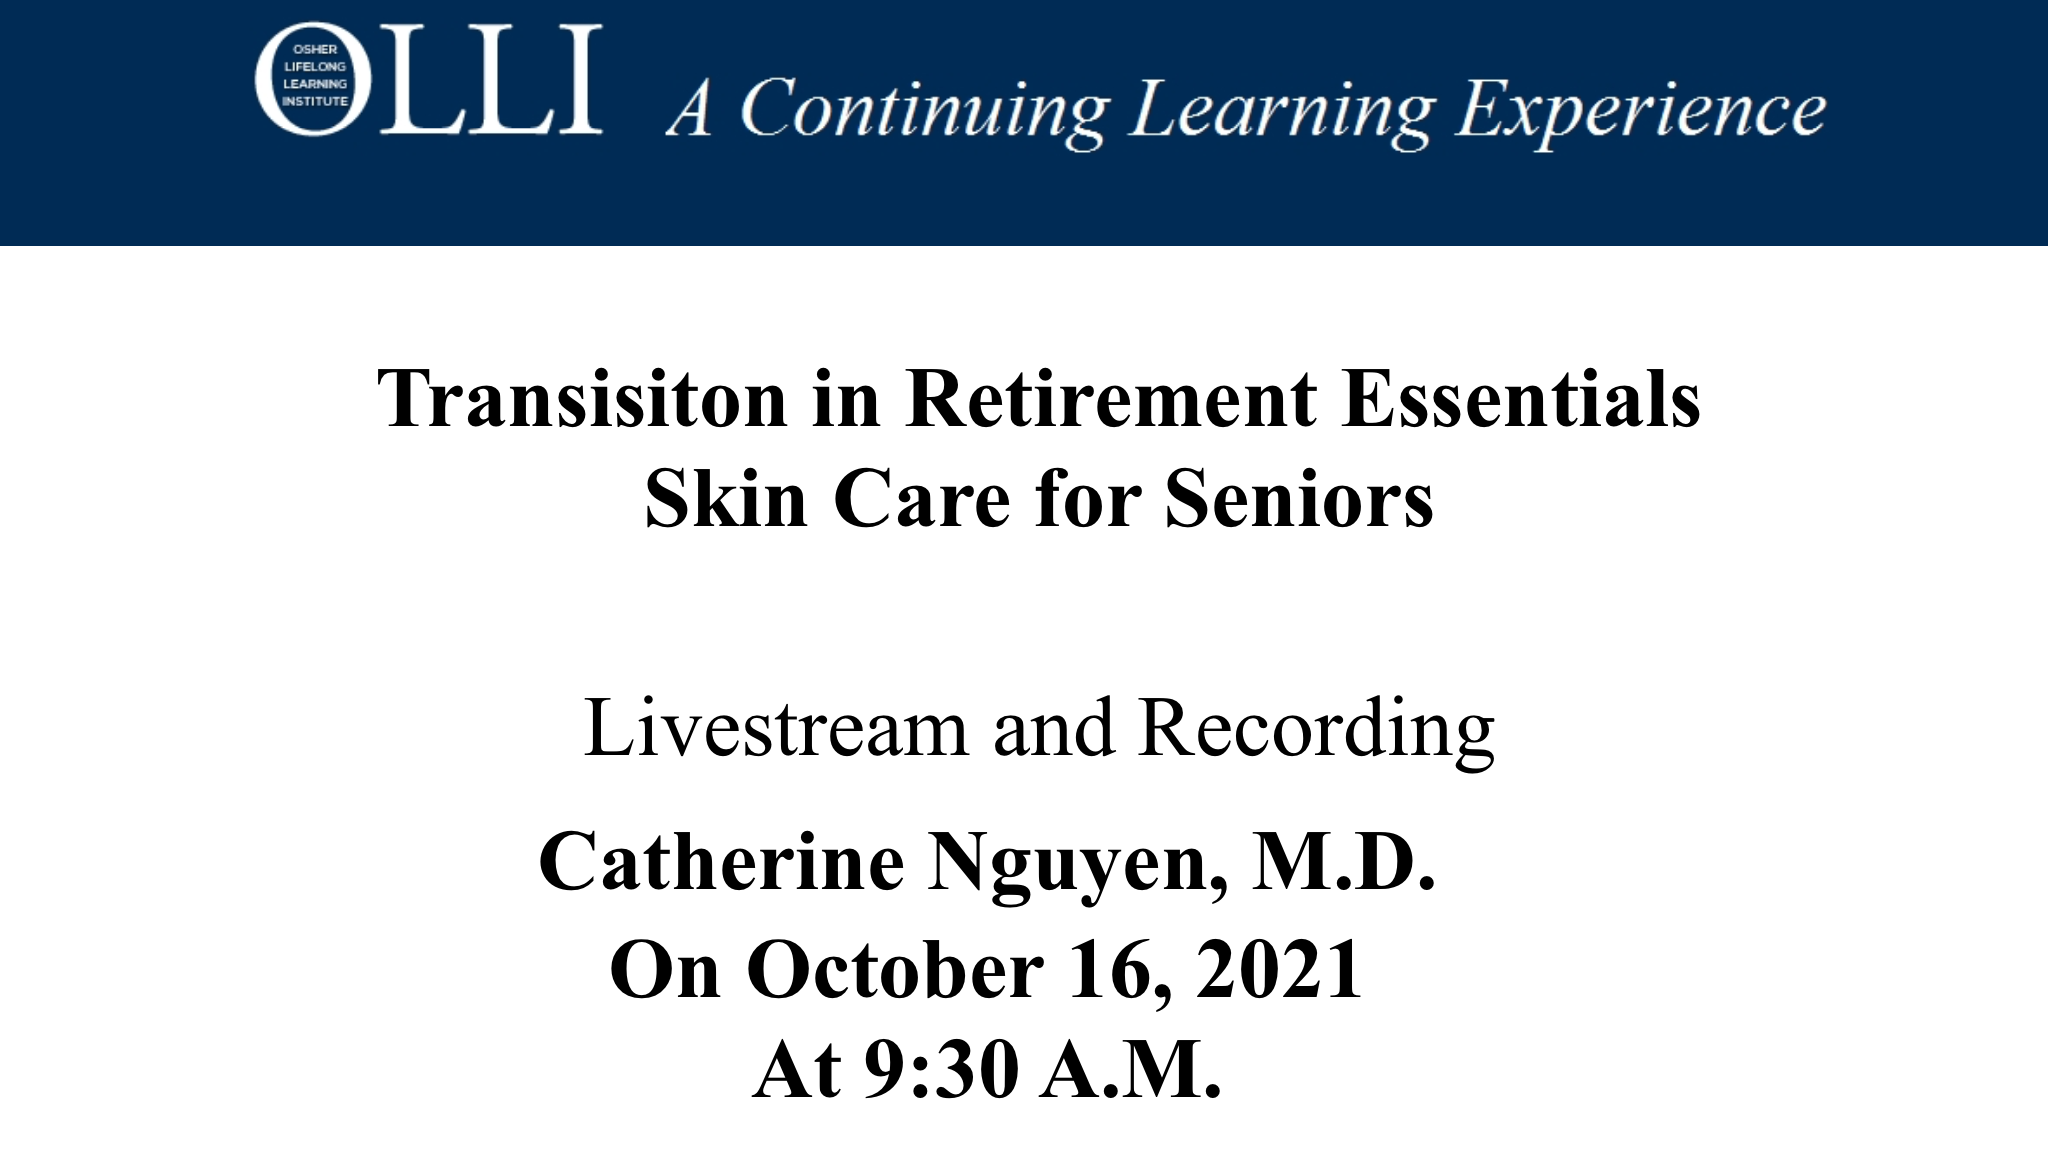 Click here to view the livestream Skin Care for Seniors